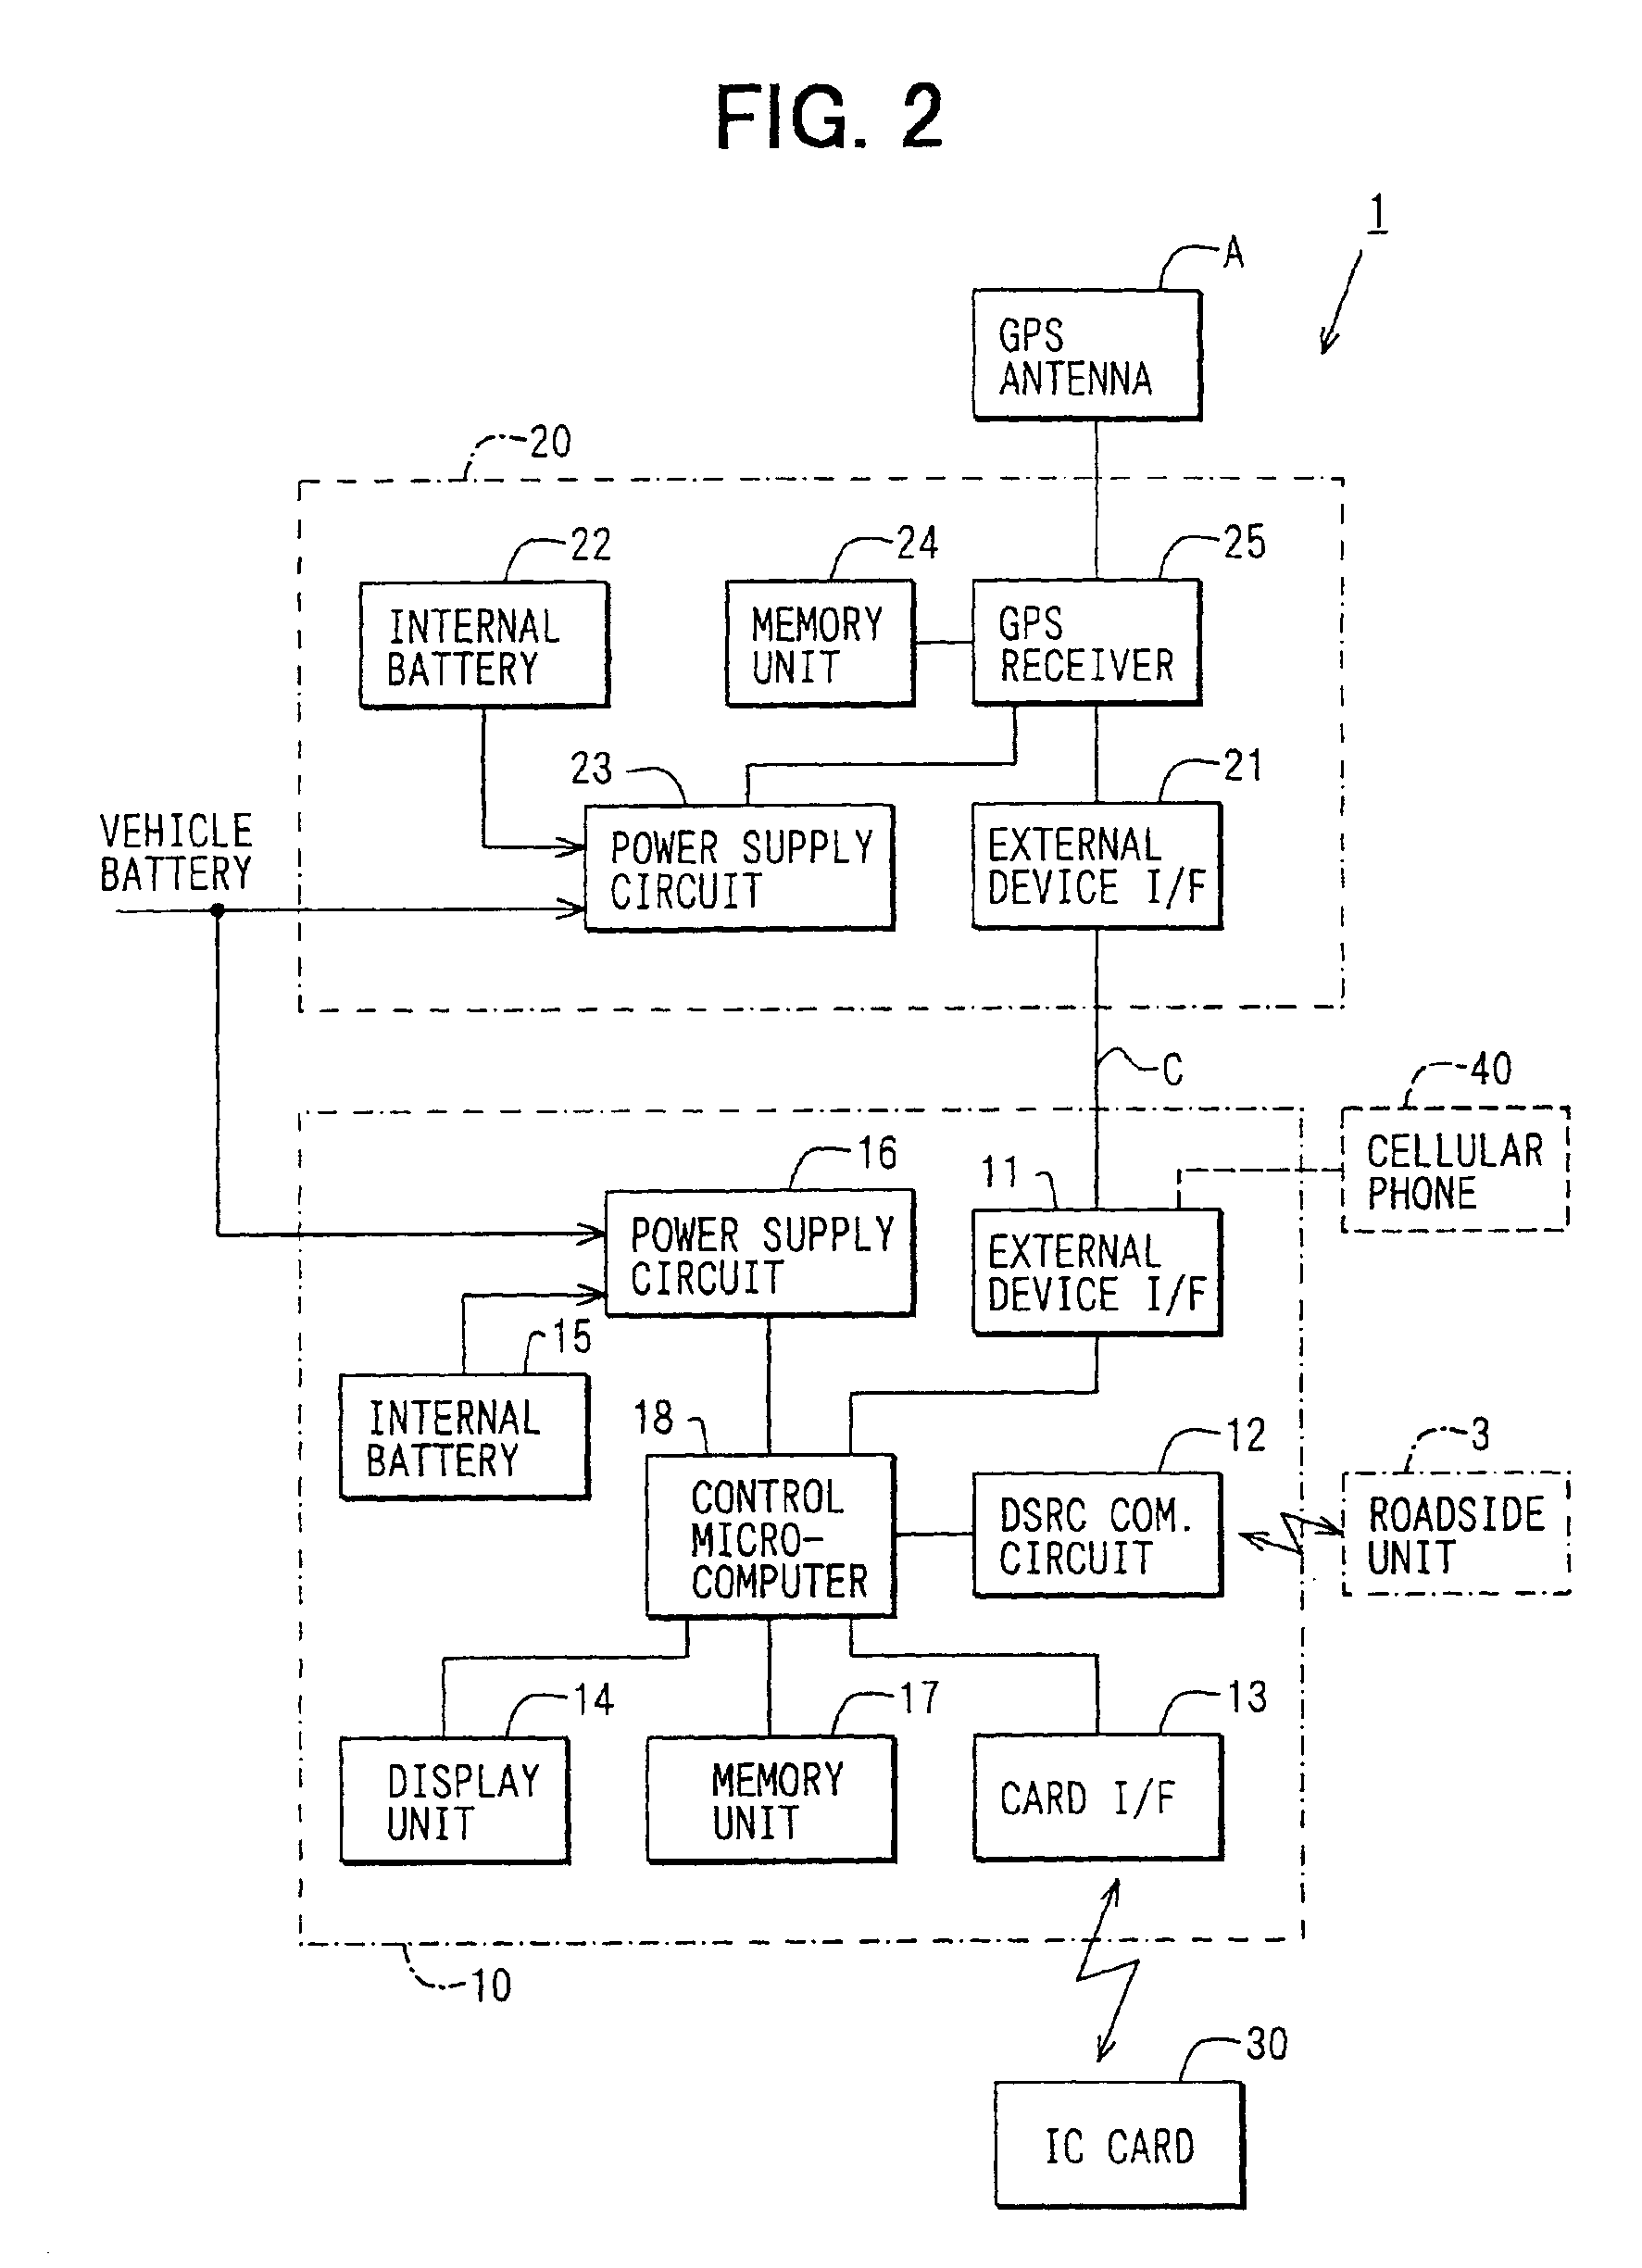 In-vehicle apparatus and service providing system